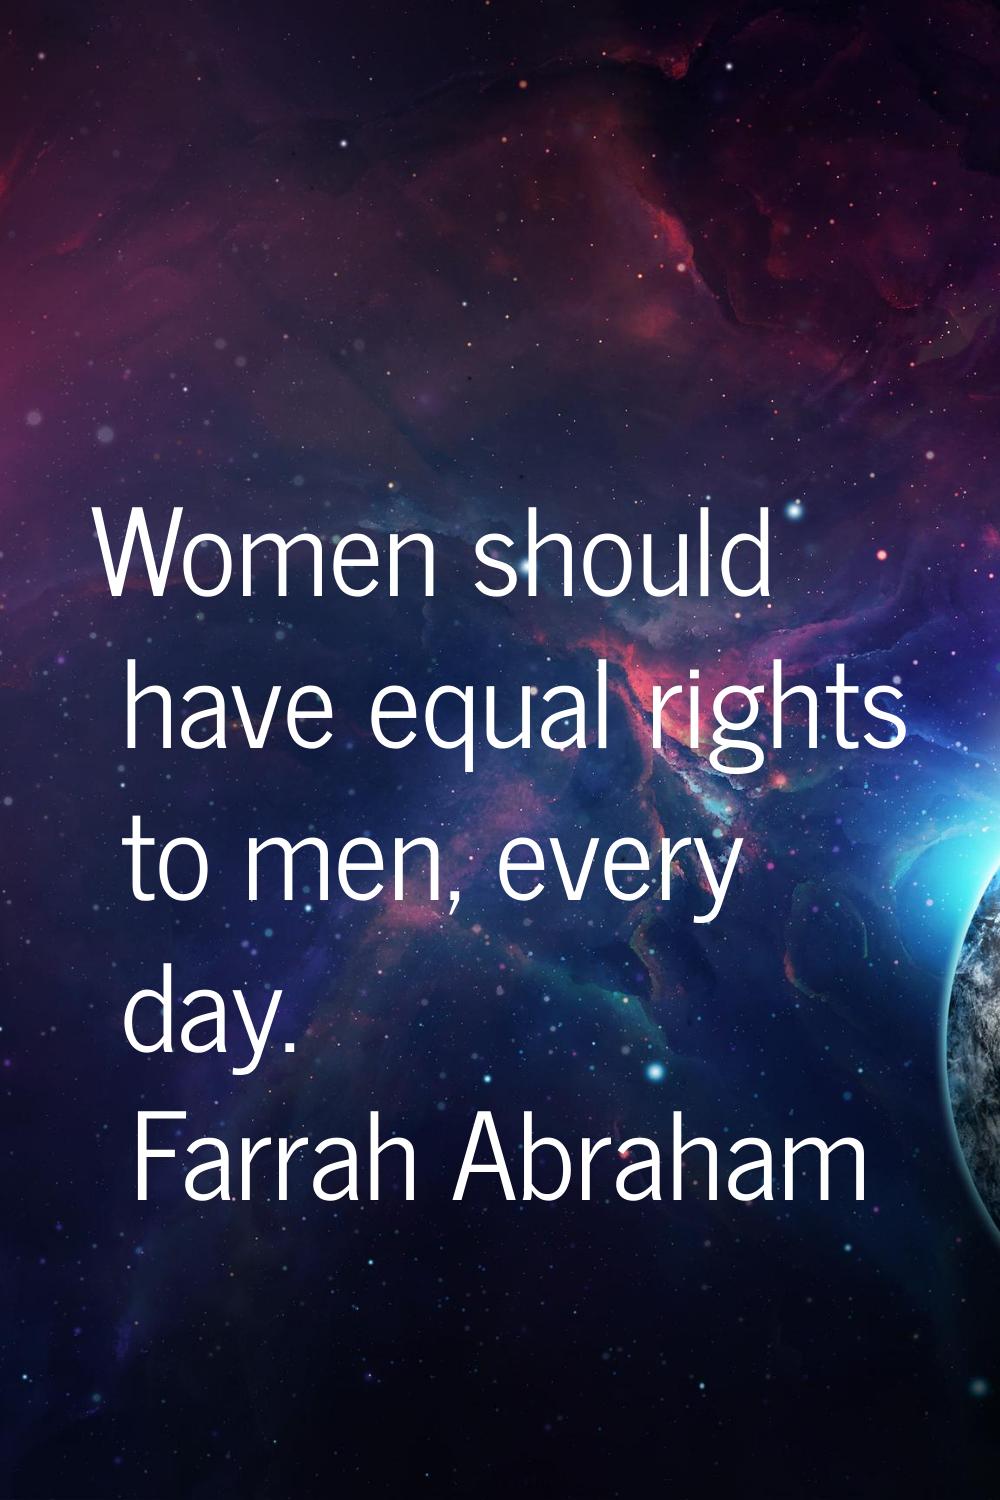 Women should have equal rights to men, every day.